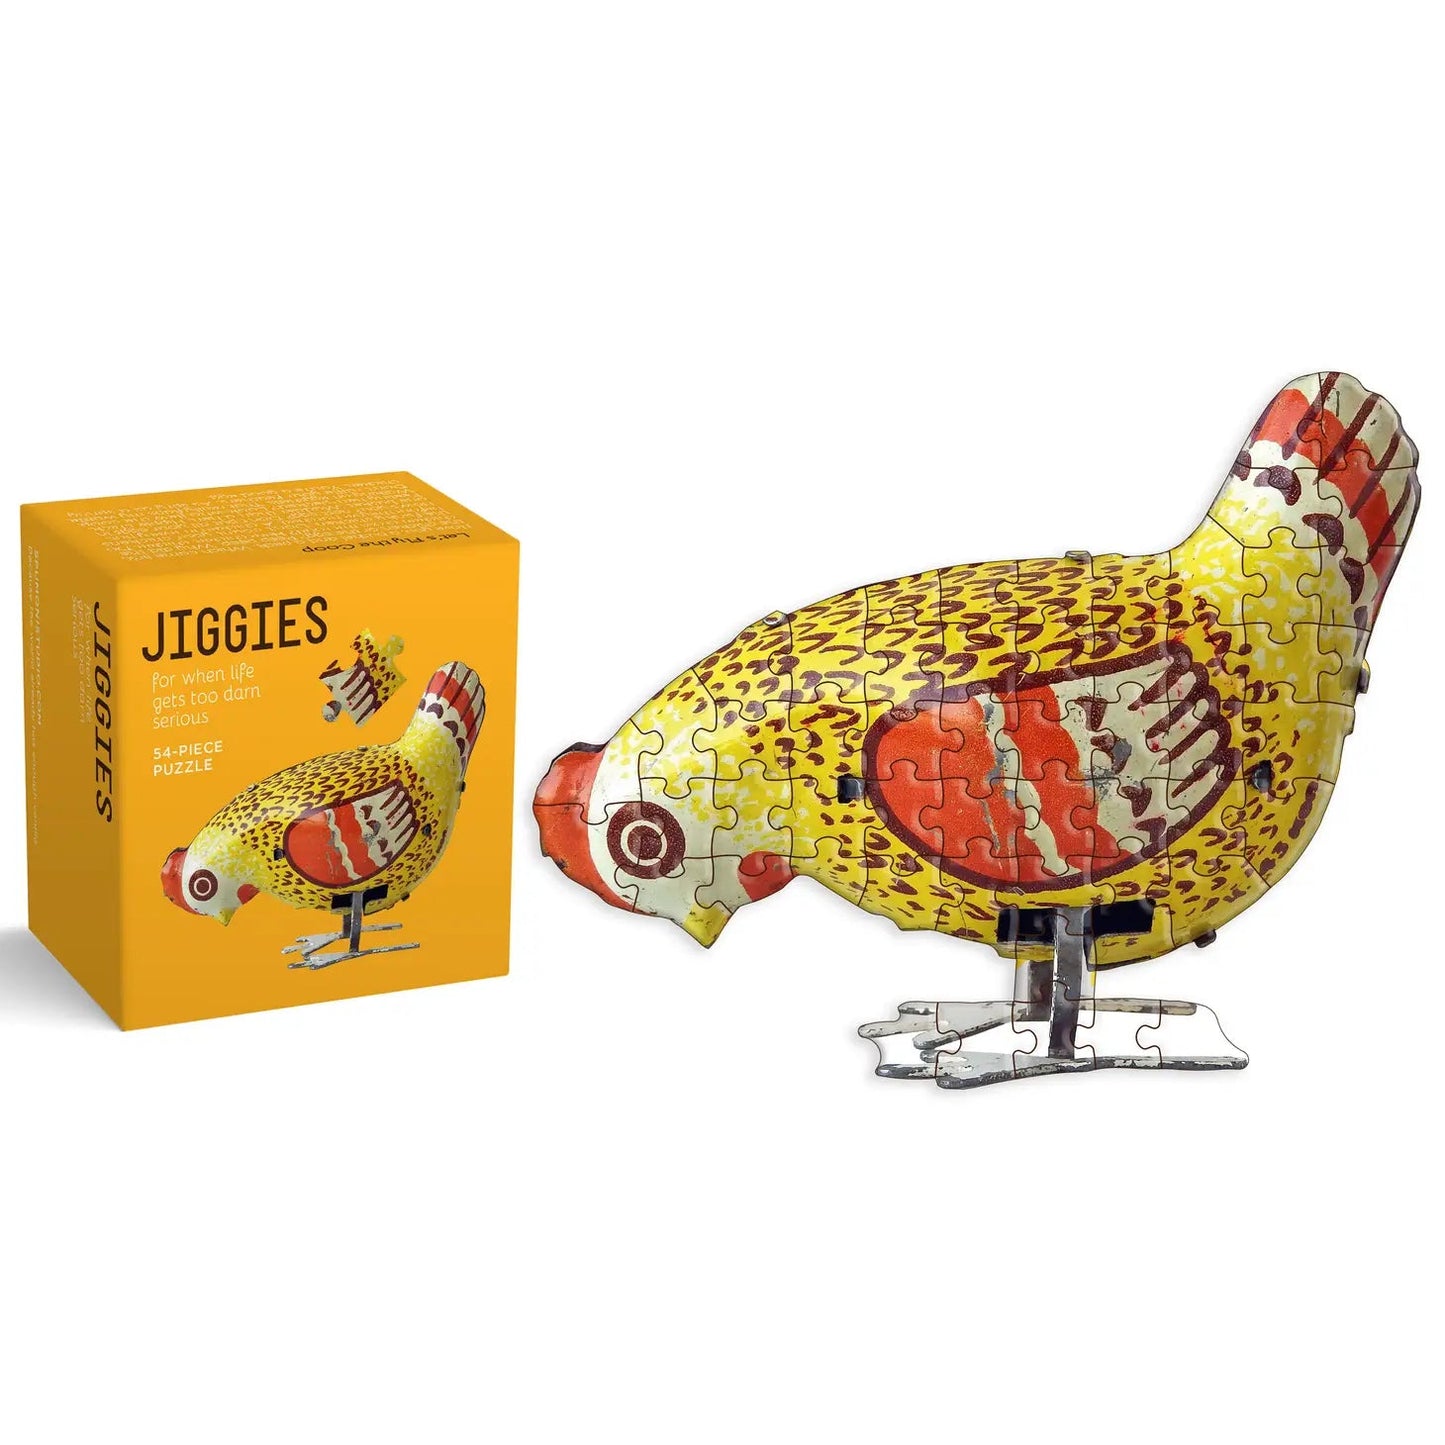 Jiggies Let's Fly The Coop 54 Piece Puzzle